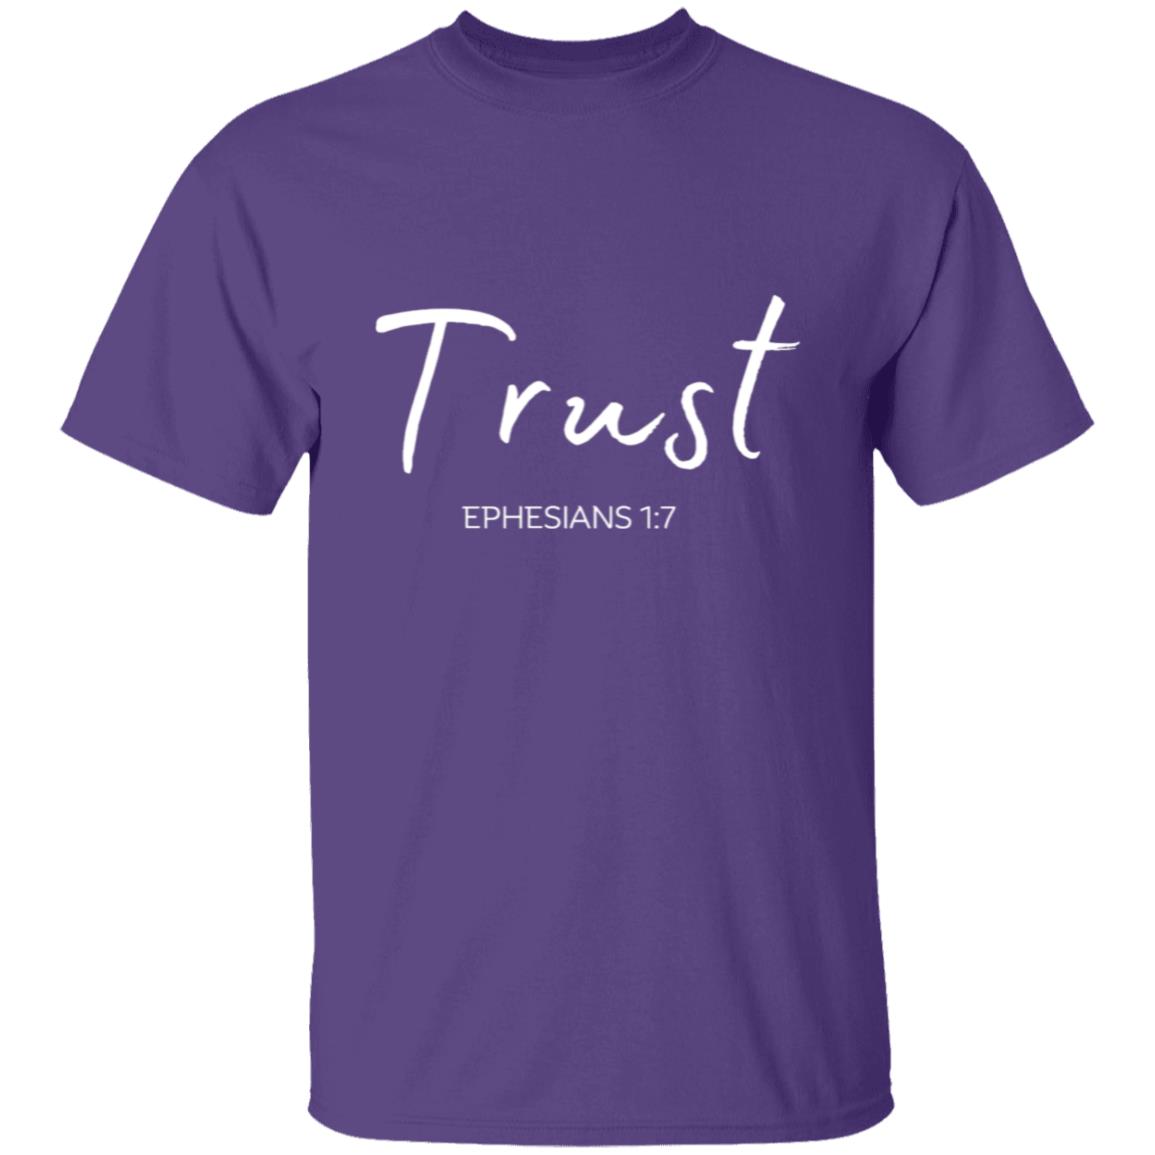 Get trendy with Trust (Ephesians 1:7)T-Shirt: Words of Faith Series (white text) - T-Shirts available at Good Gift Company. Grab yours for $21.95 today!